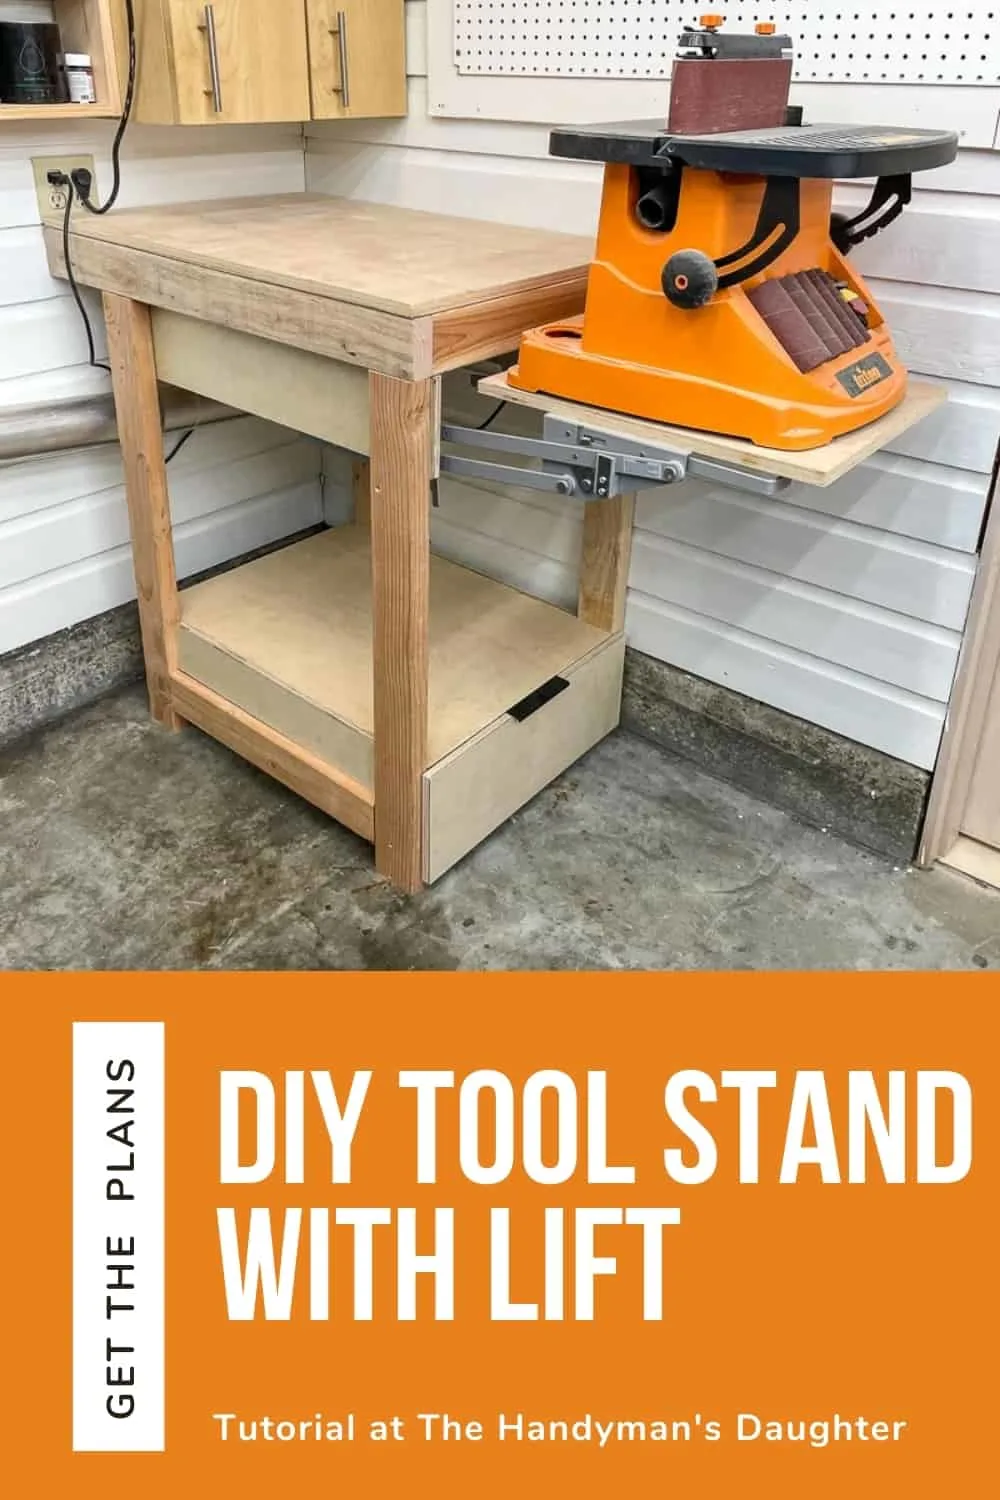 Easy DIY planer stand with storage, folding out-feed table and rollers.  [PLANS] 